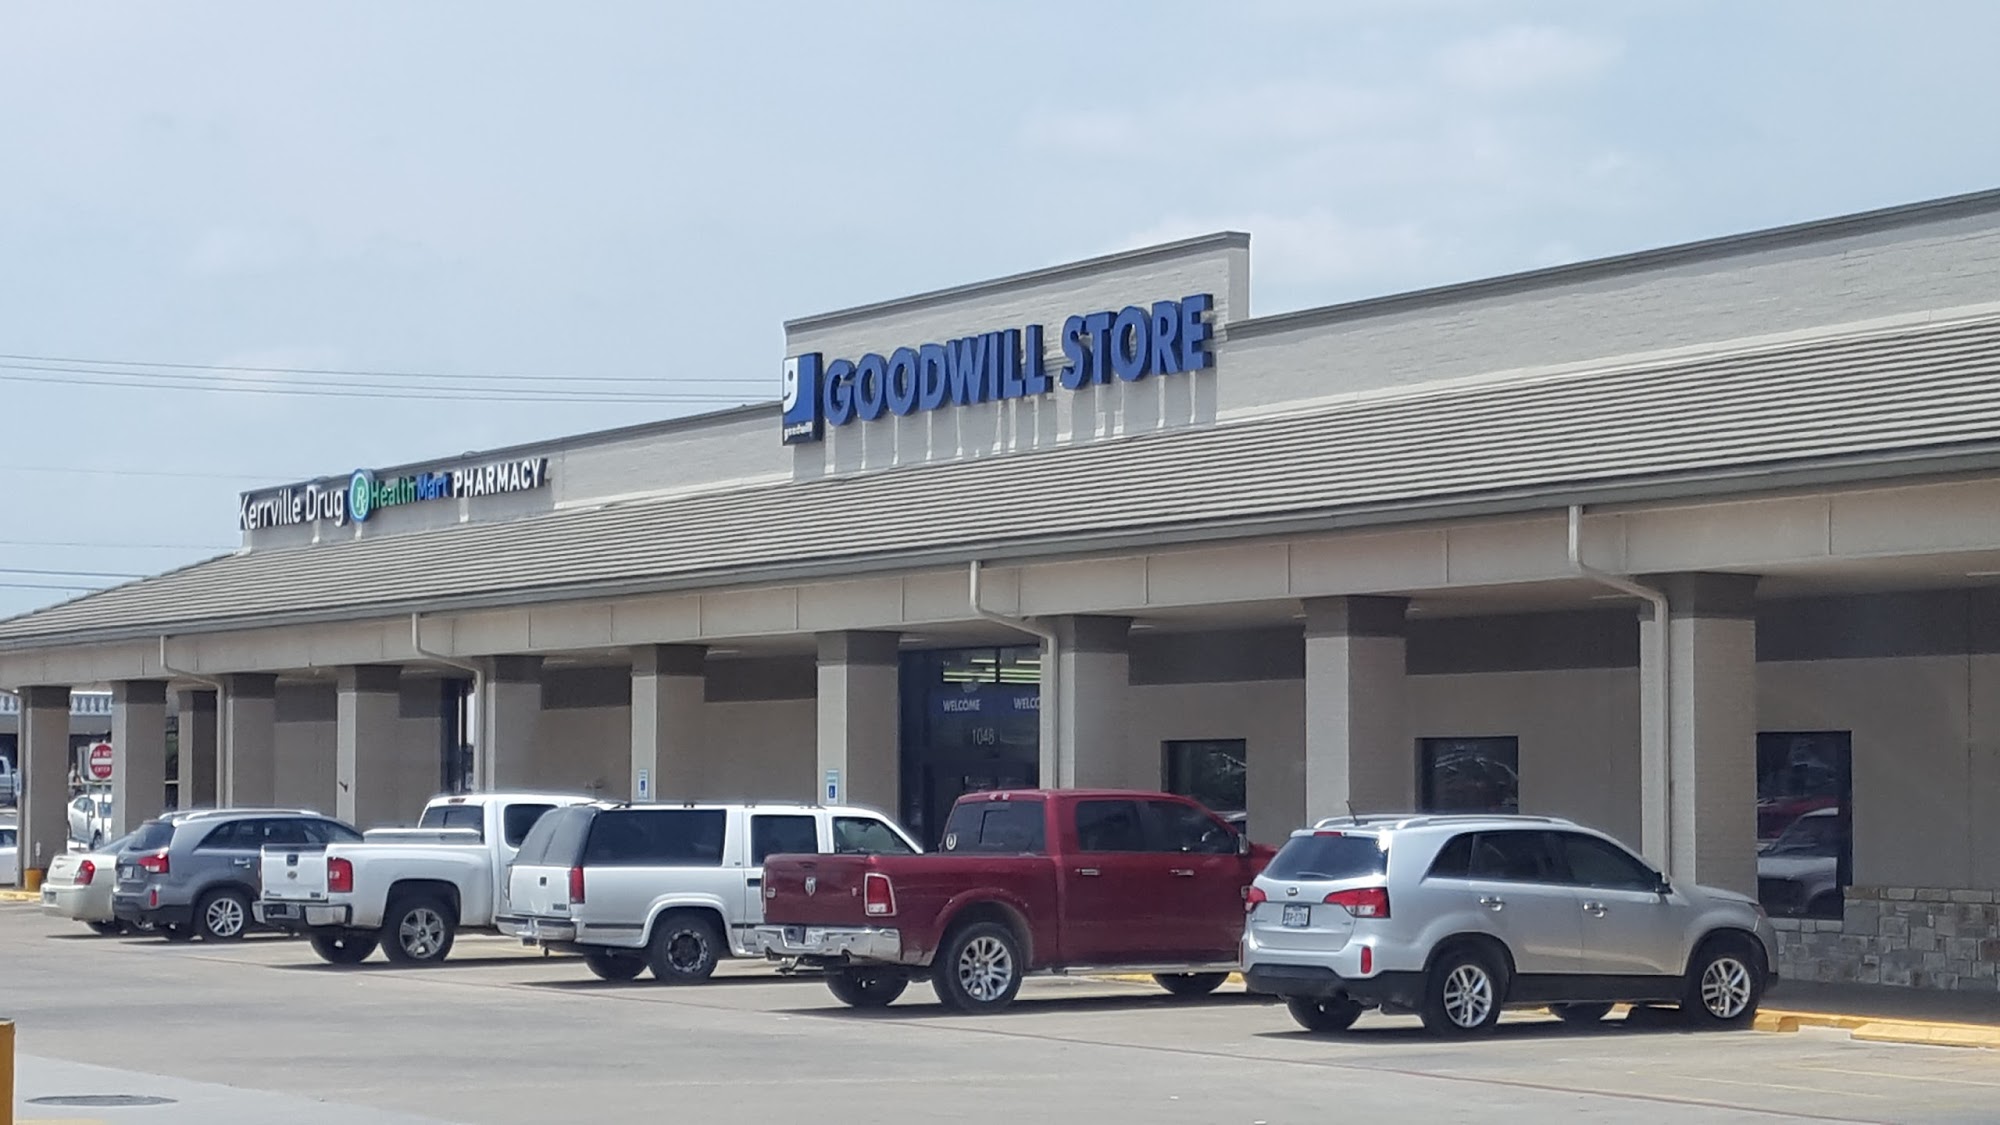 Goodwill Store and Donation Station (temp. closed on Sundays)